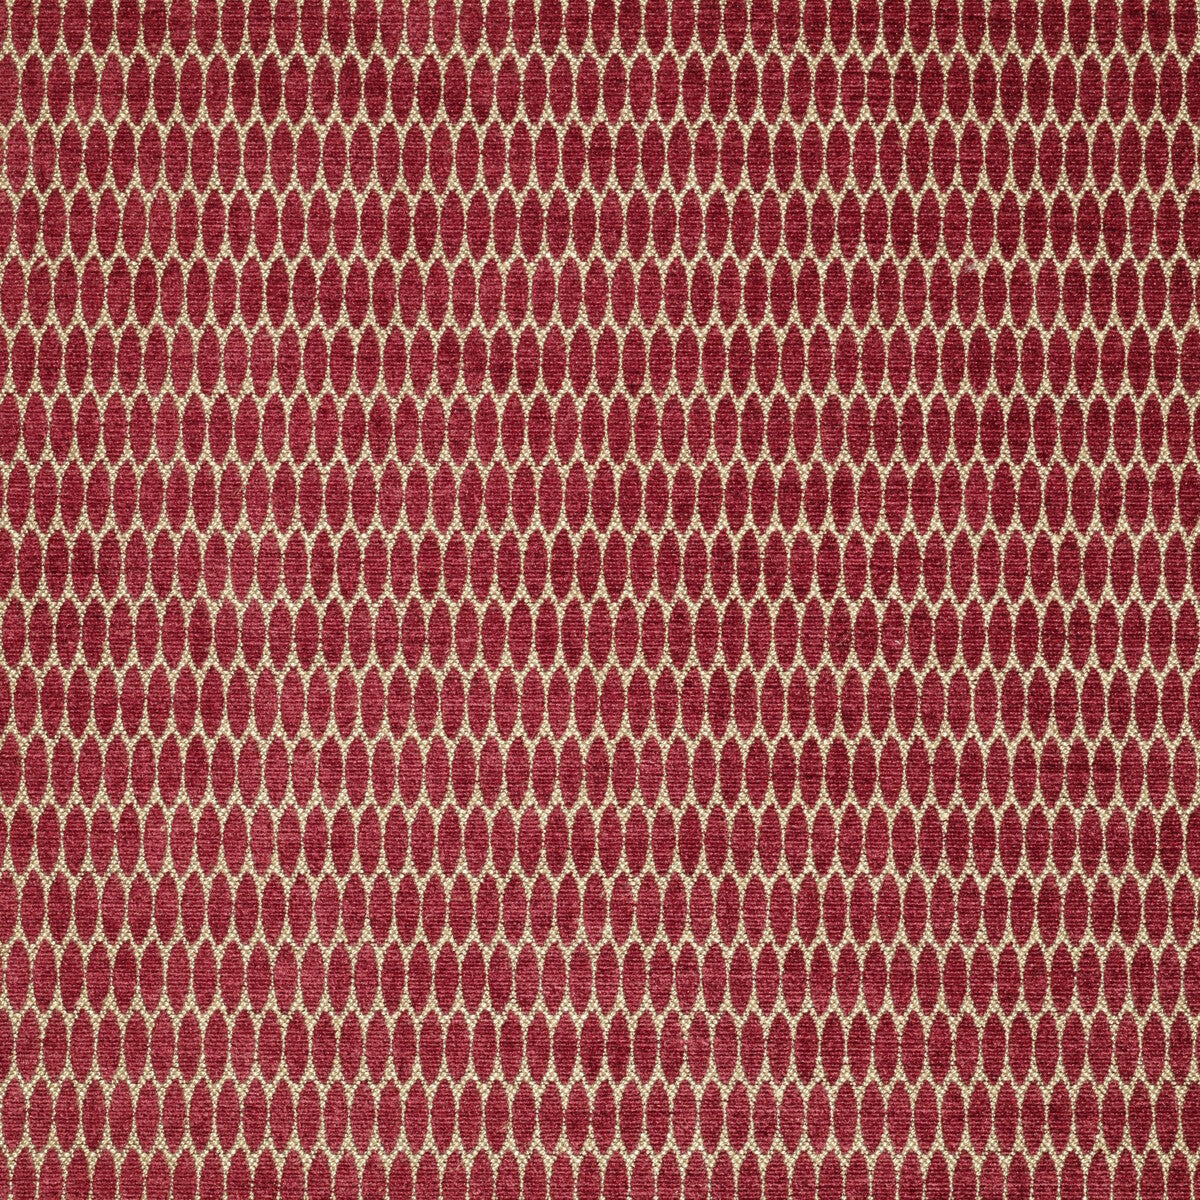 Compton fabric in raspberry color - pattern BFC-3658.97.0 - by Lee Jofa in the Blithfield collection